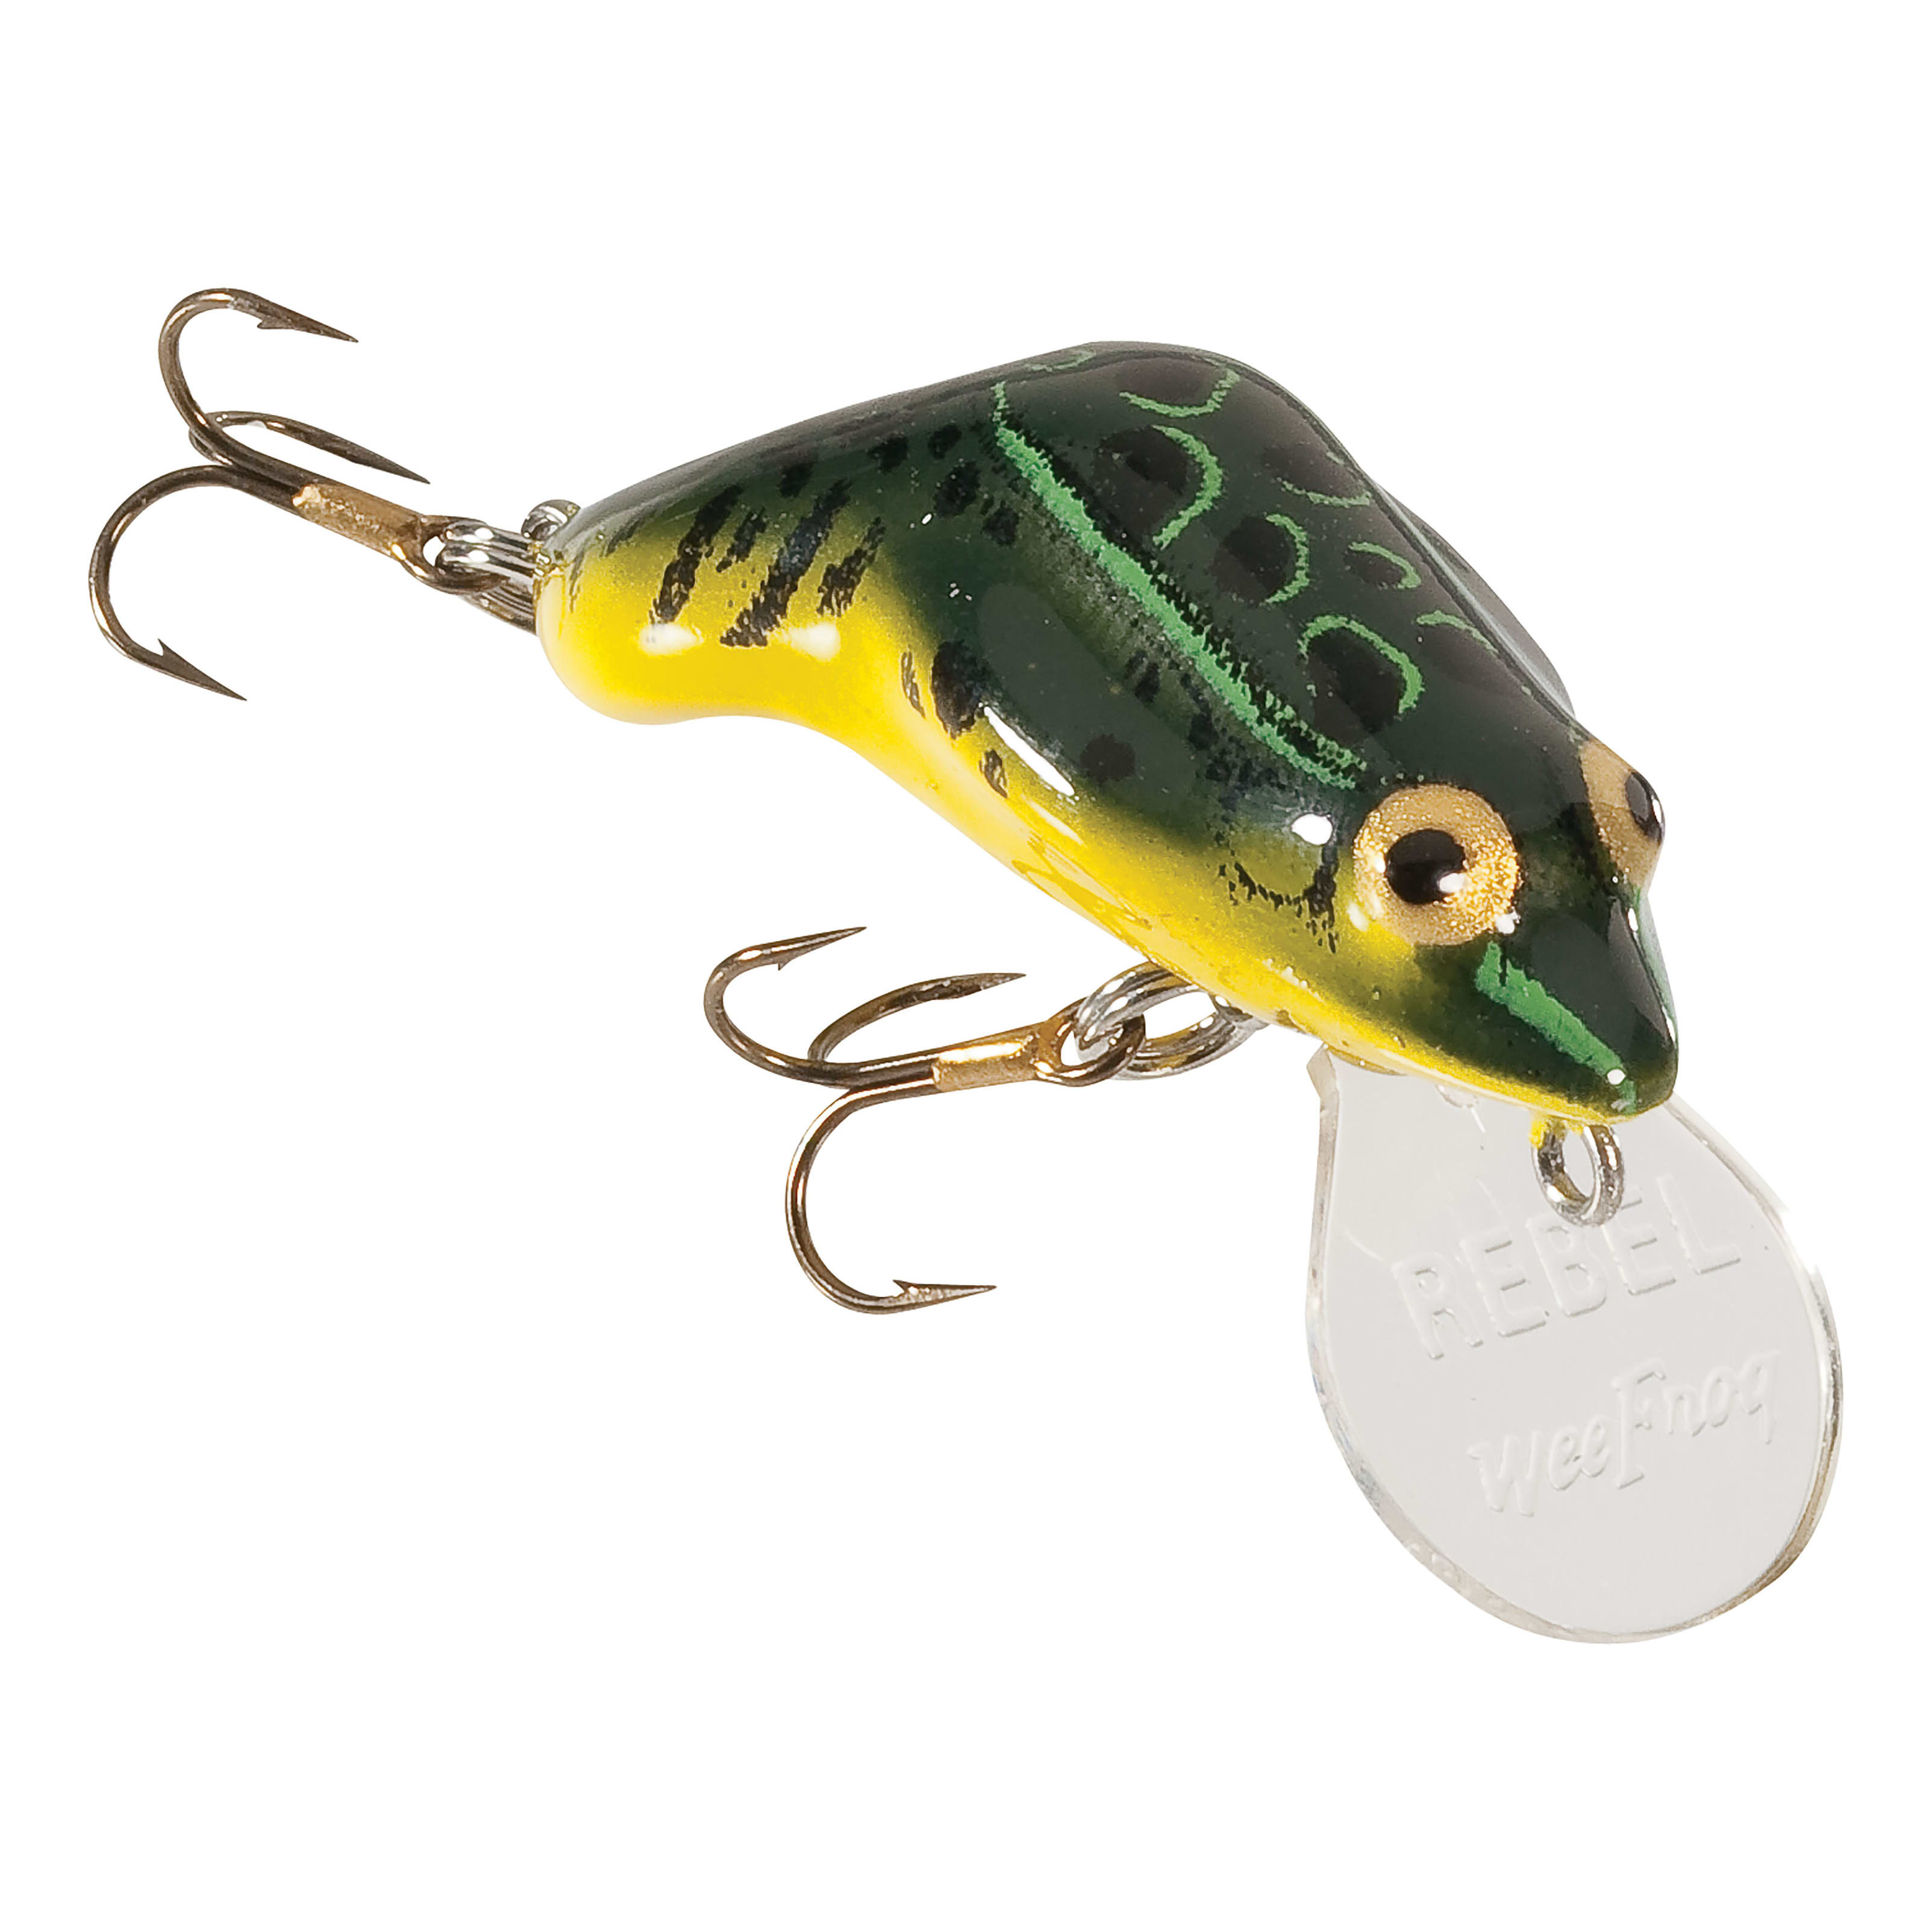 Tossing around a Mouse lure For river BEASTS! 